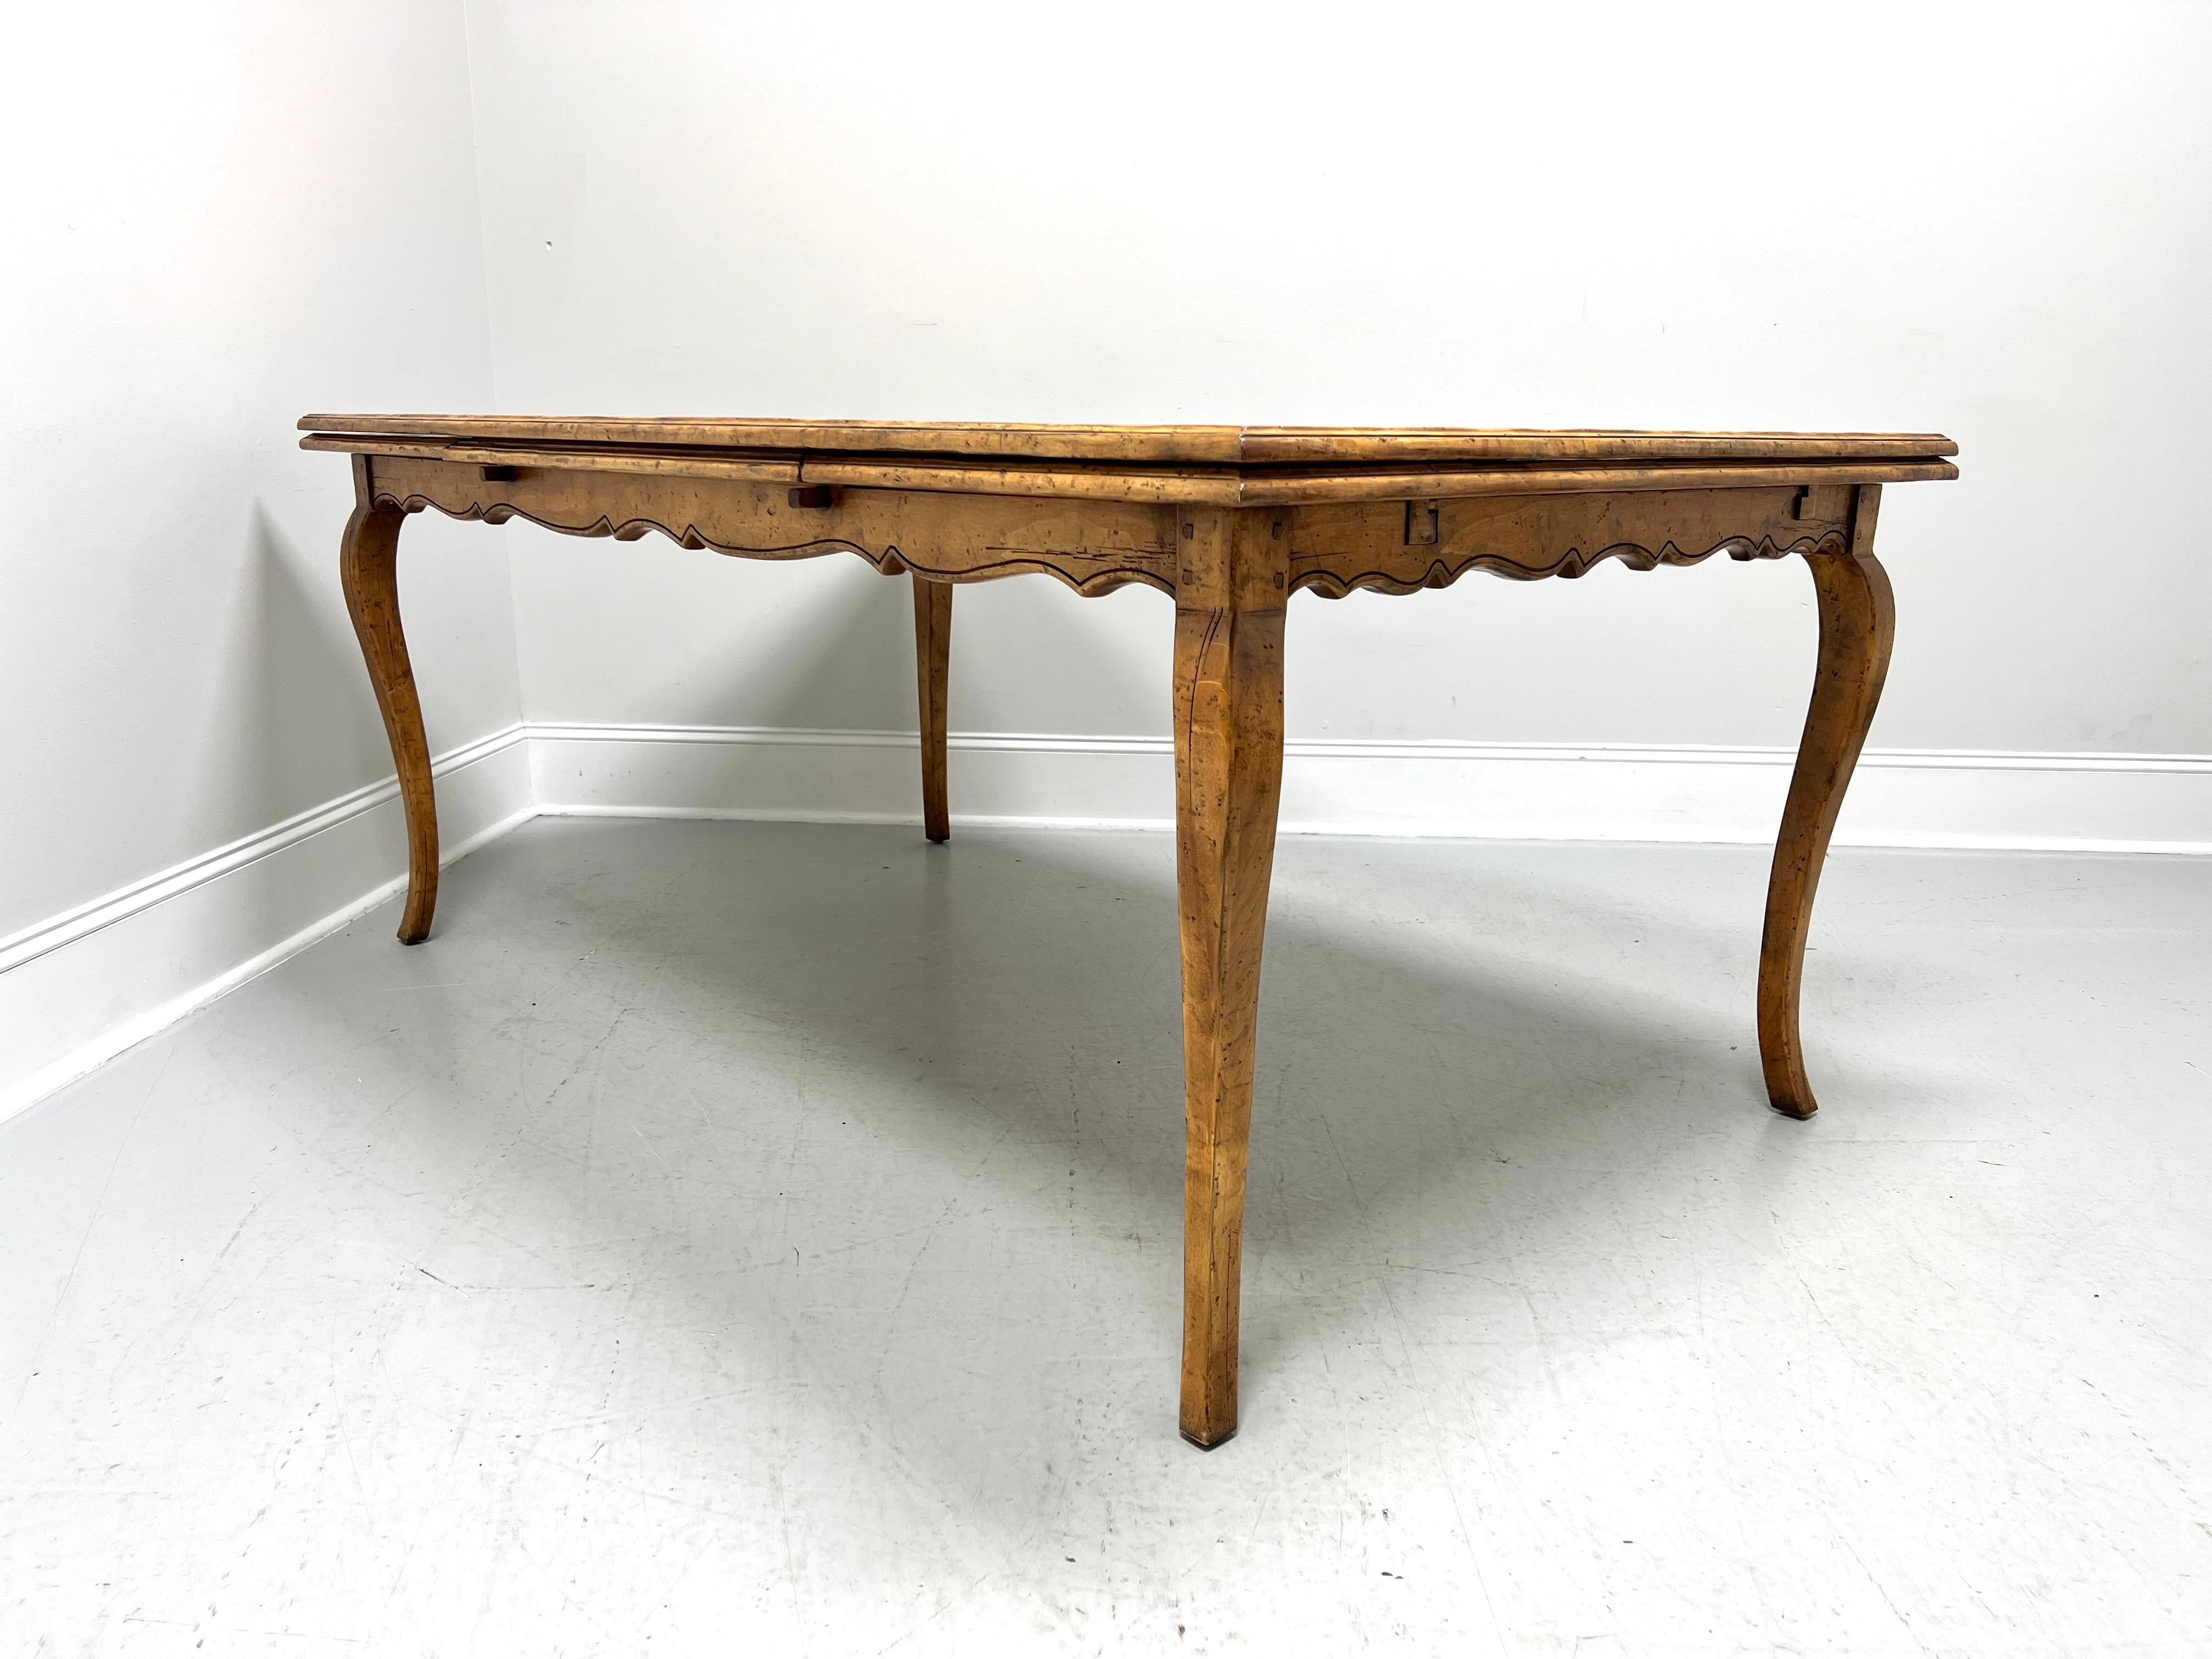 A drawtop dining table in the French Country style, unbranded. Nutwood with a distressed finish, banded parquetry design to top, two self-storing draw leaves, carved apron, and cabriole legs. Leaves pull out from either end of the table and work on